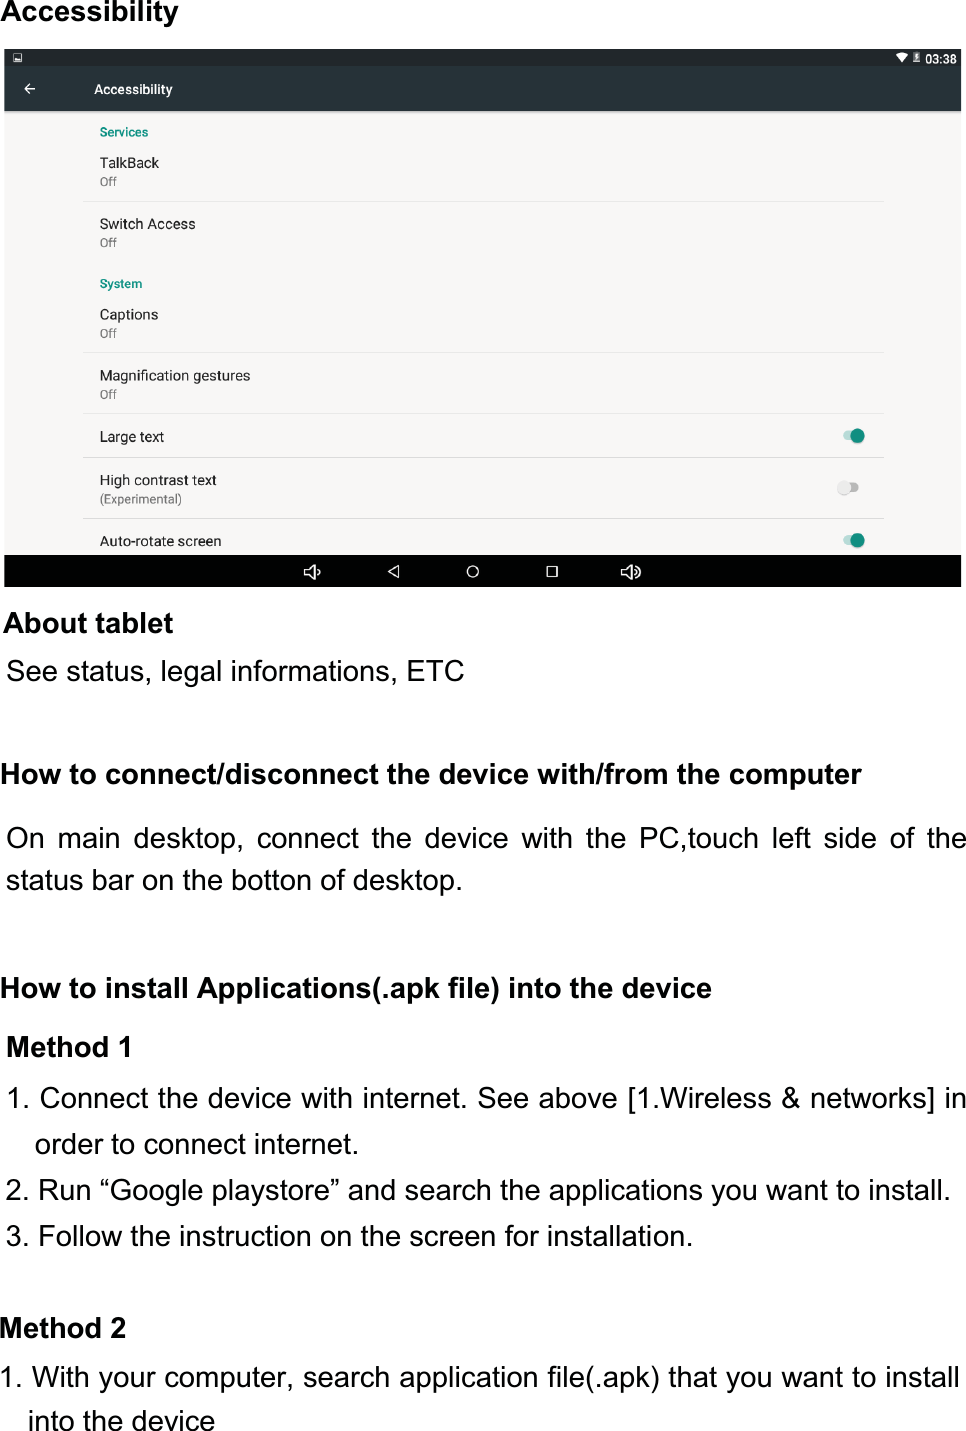 About tabletSee status, legal informations, ETCHow to connect/disconnect the device with/from the computerOn main desktop, connect the device with the PC,touch left side of thestatus bar on the botton of desktop.How to install Applications(.apk file) into the deviceMethod 11. Connect the device with internet. See above [1.Wireless &amp; networks] inorder to connect internet.2. Run “Google playstore” and search the applications you want to install.3. Follow the instruction on the screen for installation.Method 21. With your computer, search application file(.apk) that you want to installinto the deviceAccessibility